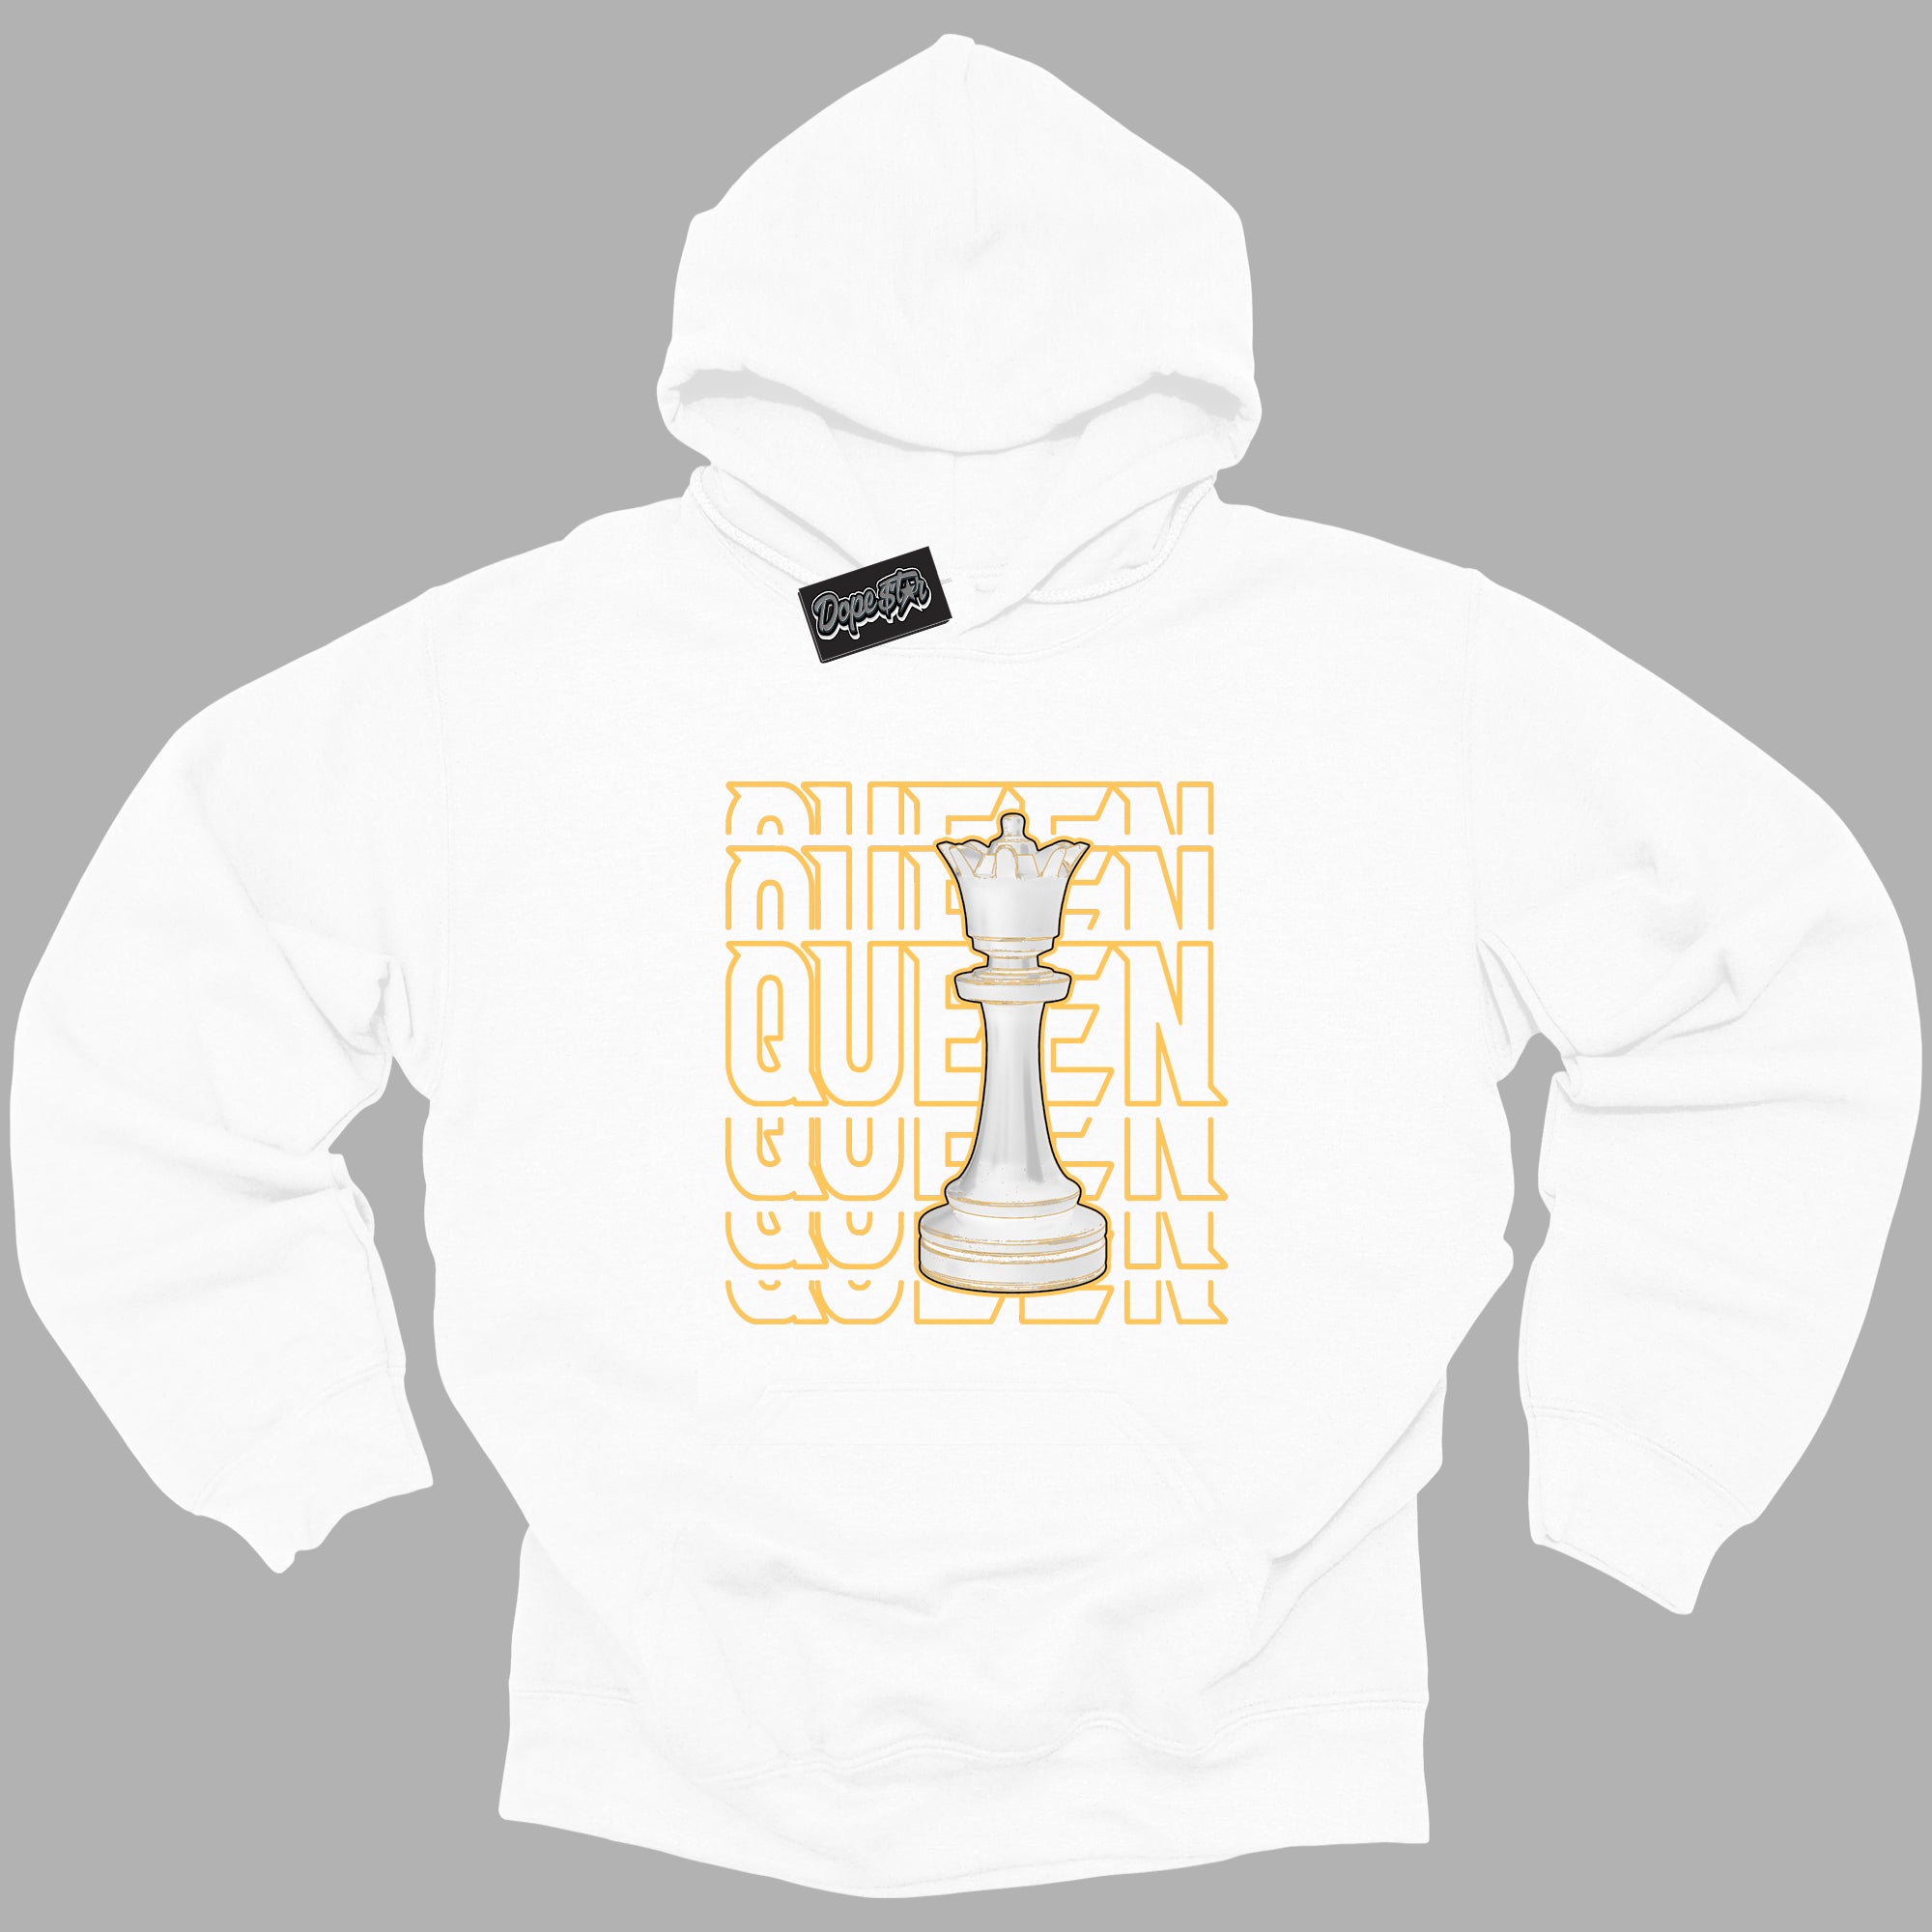 Cool White Hoodie with “ Queen Chess ”  design that Perfectly Matches Yellow Ochre 6s Sneakers.